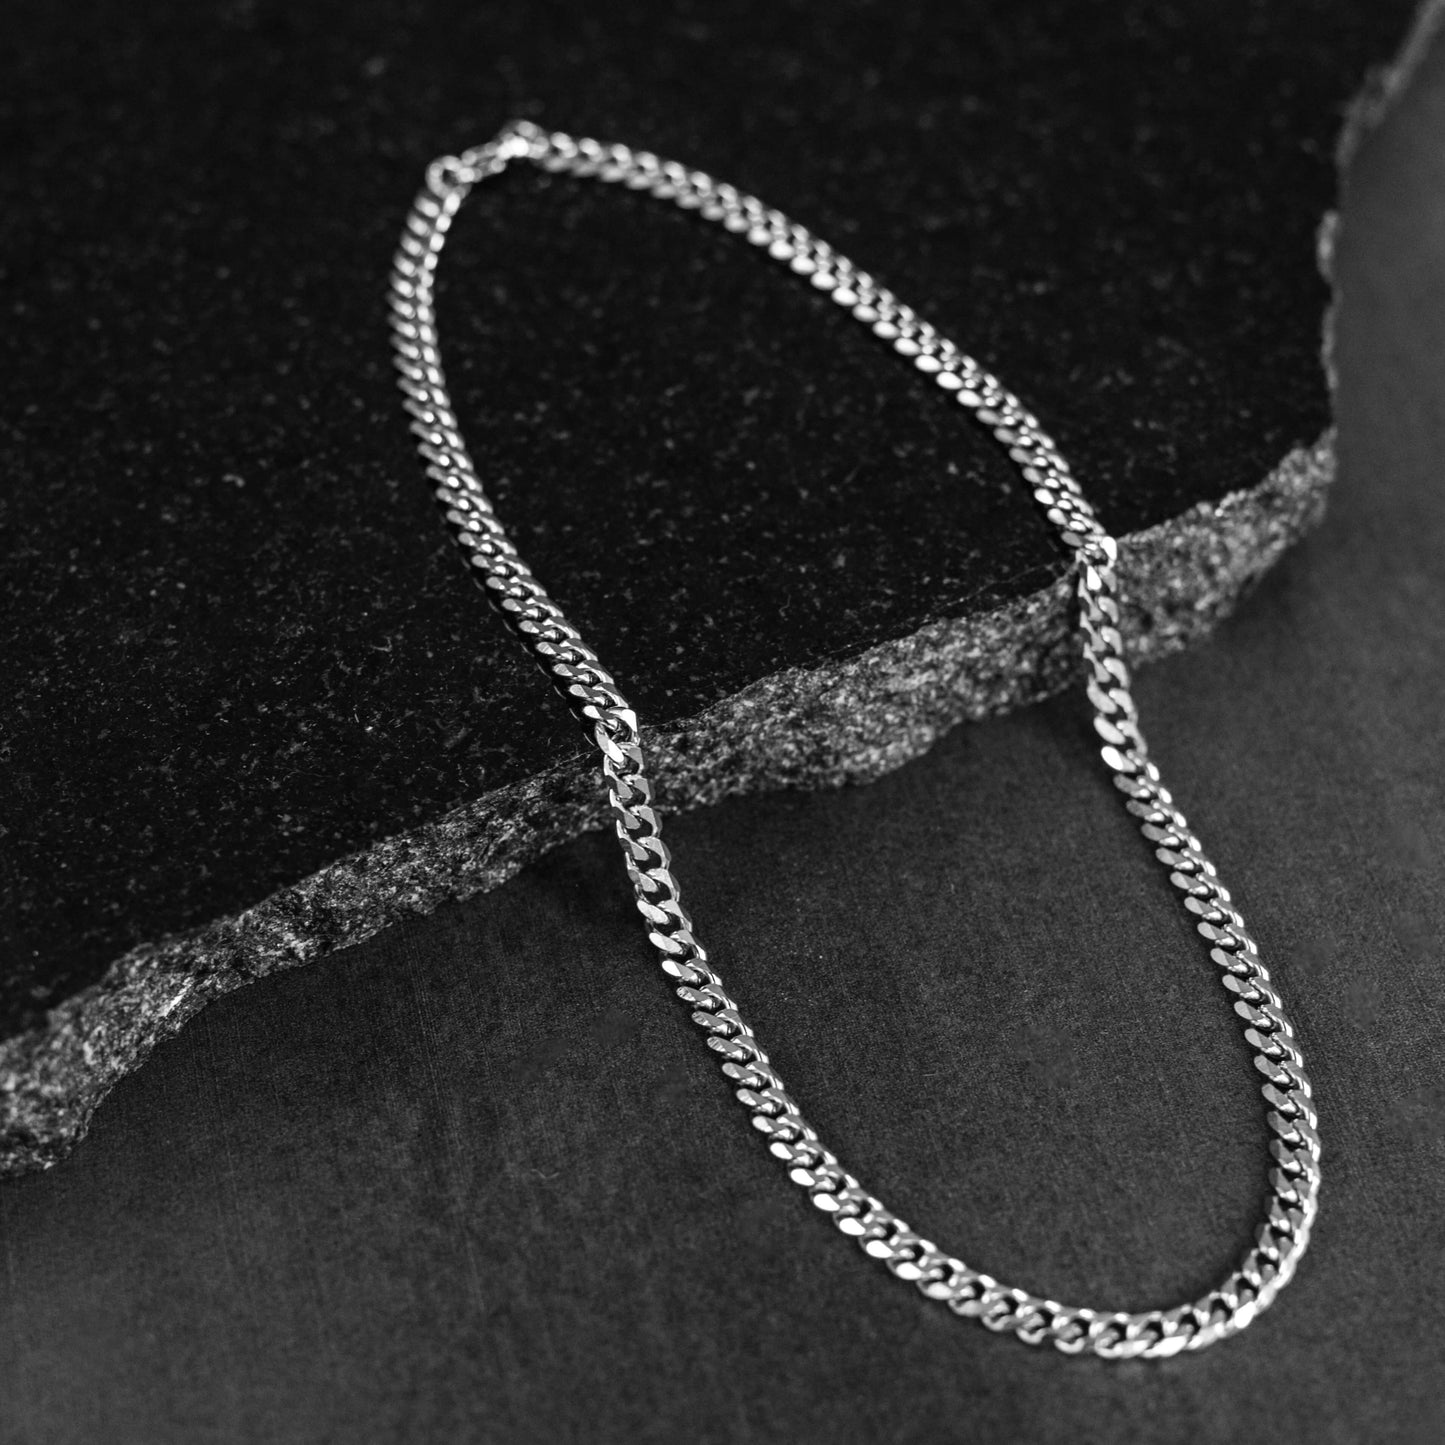 Chunky Silver 5mm Cuban Curb Chain Necklace For Men or Women - Necklace - Boutique Wear RENN